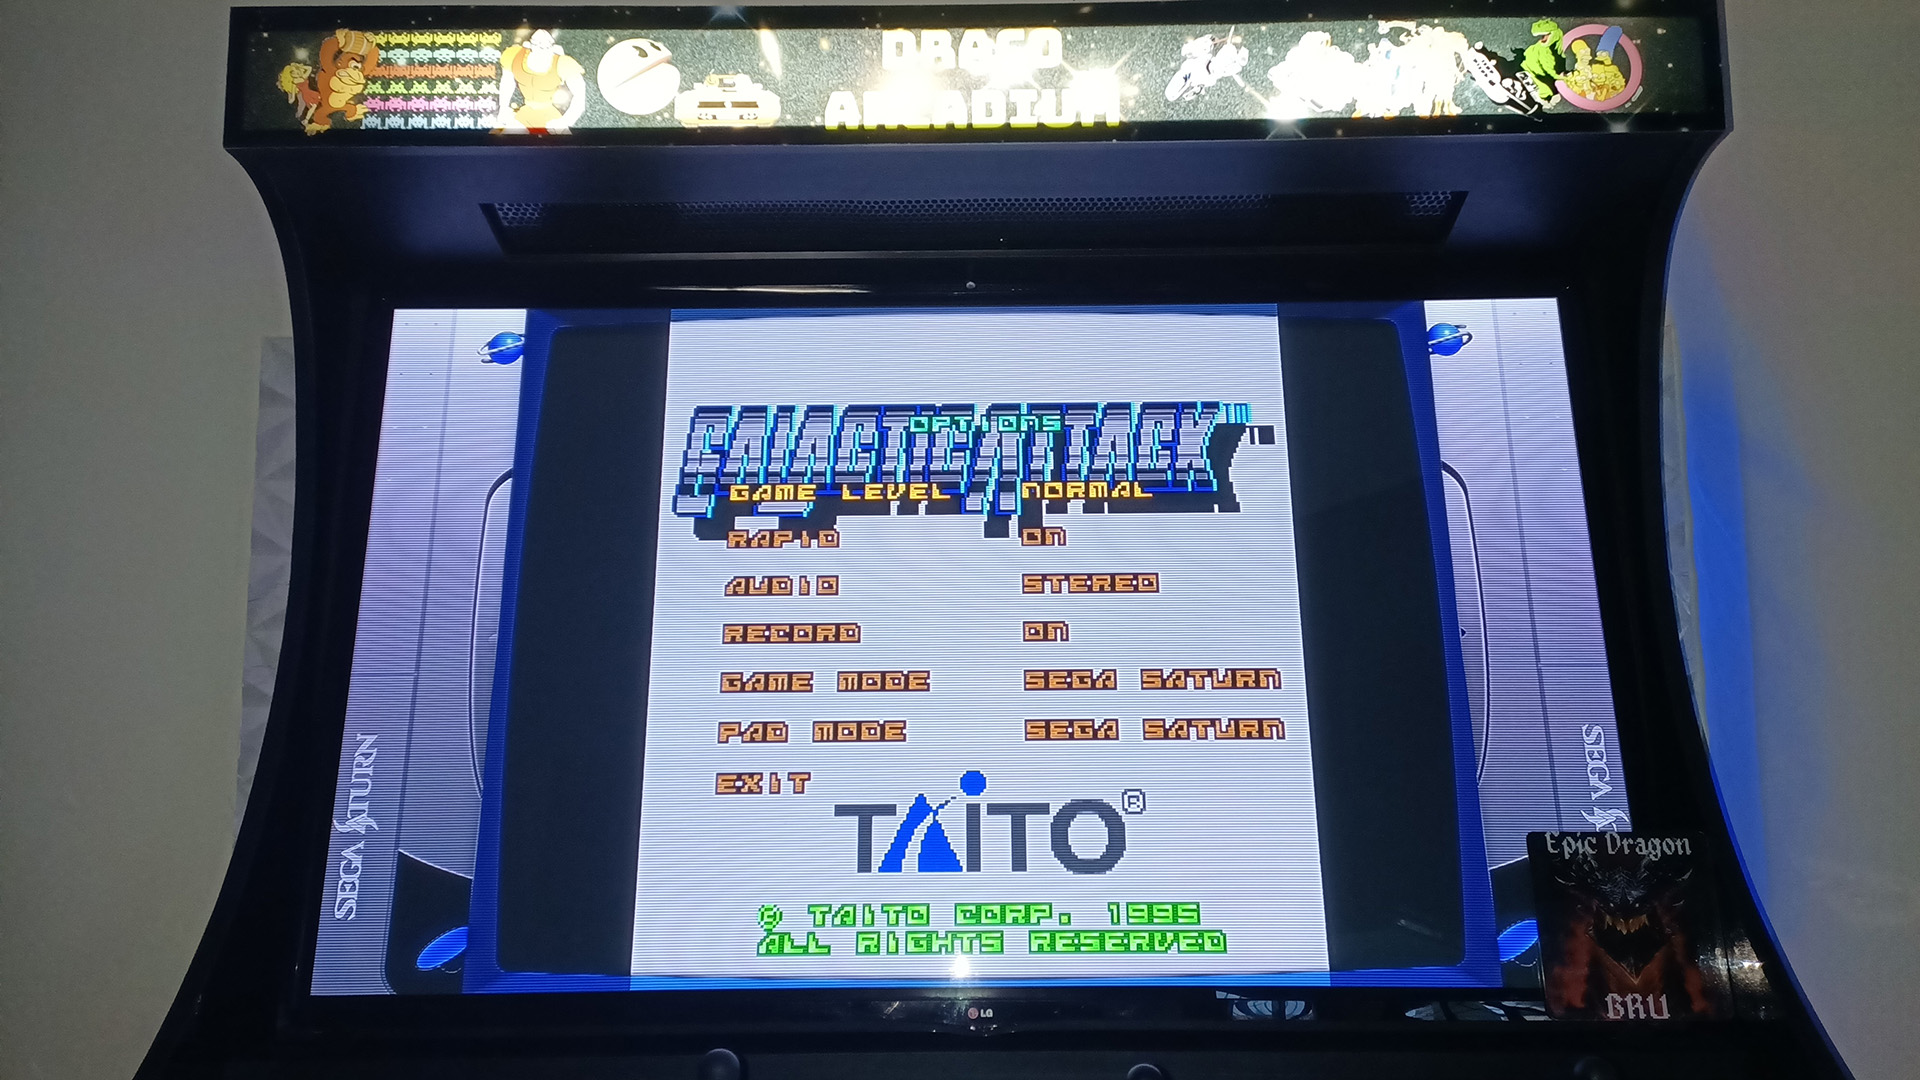 EpicDragon: Galactic Attack: Normal (Sega Saturn Emulated) 1,126,100 points on 2022-08-14 14:52:49